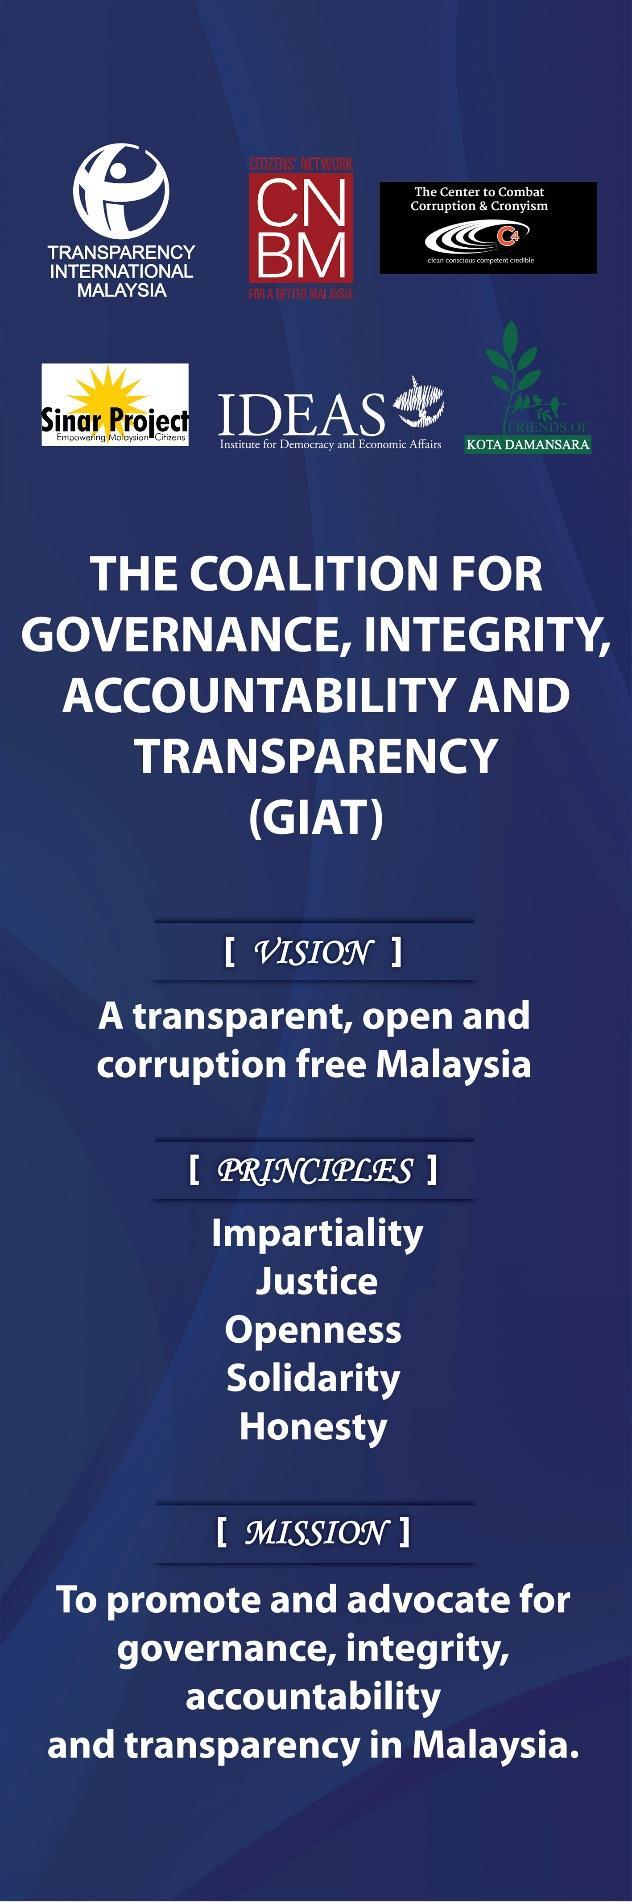 6.0 Coalition for Governance, Integrity, Accountability and Transparency (GIAT) The Coalition for Governance, Integrity, Accountability and Transparency (GIAT) was officially launched on the 13 th